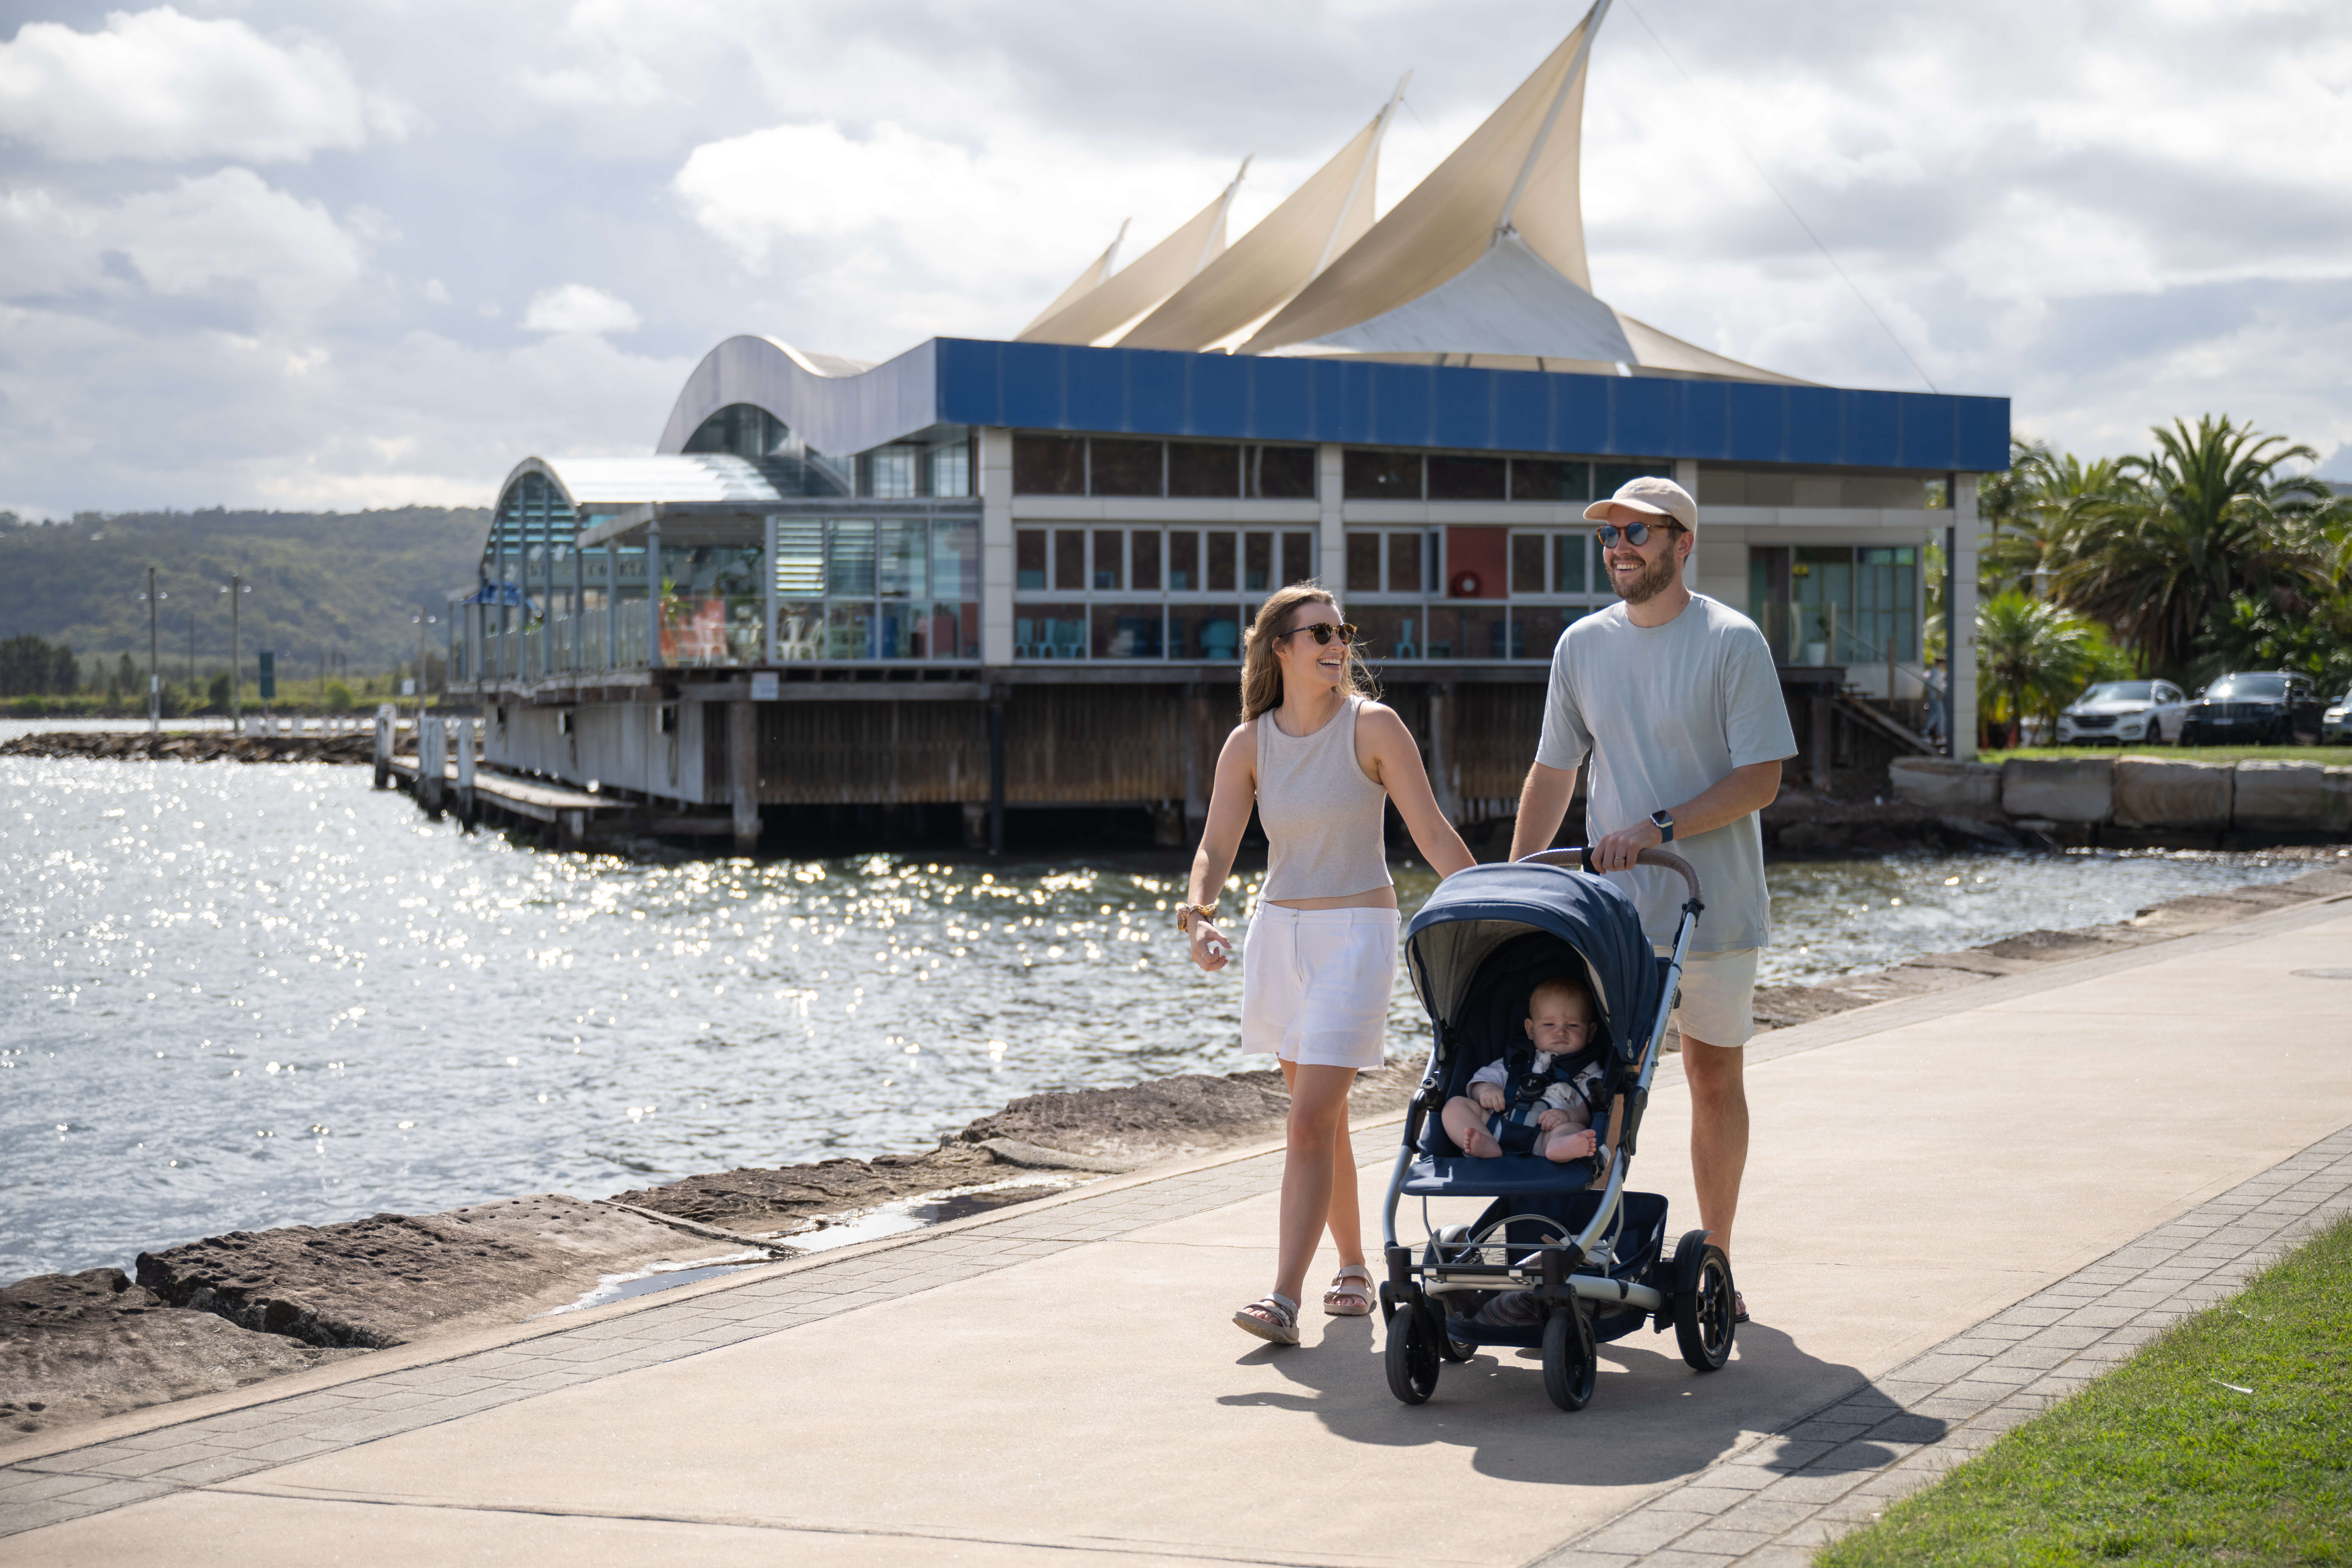 strolling the shared pathway with a pram family